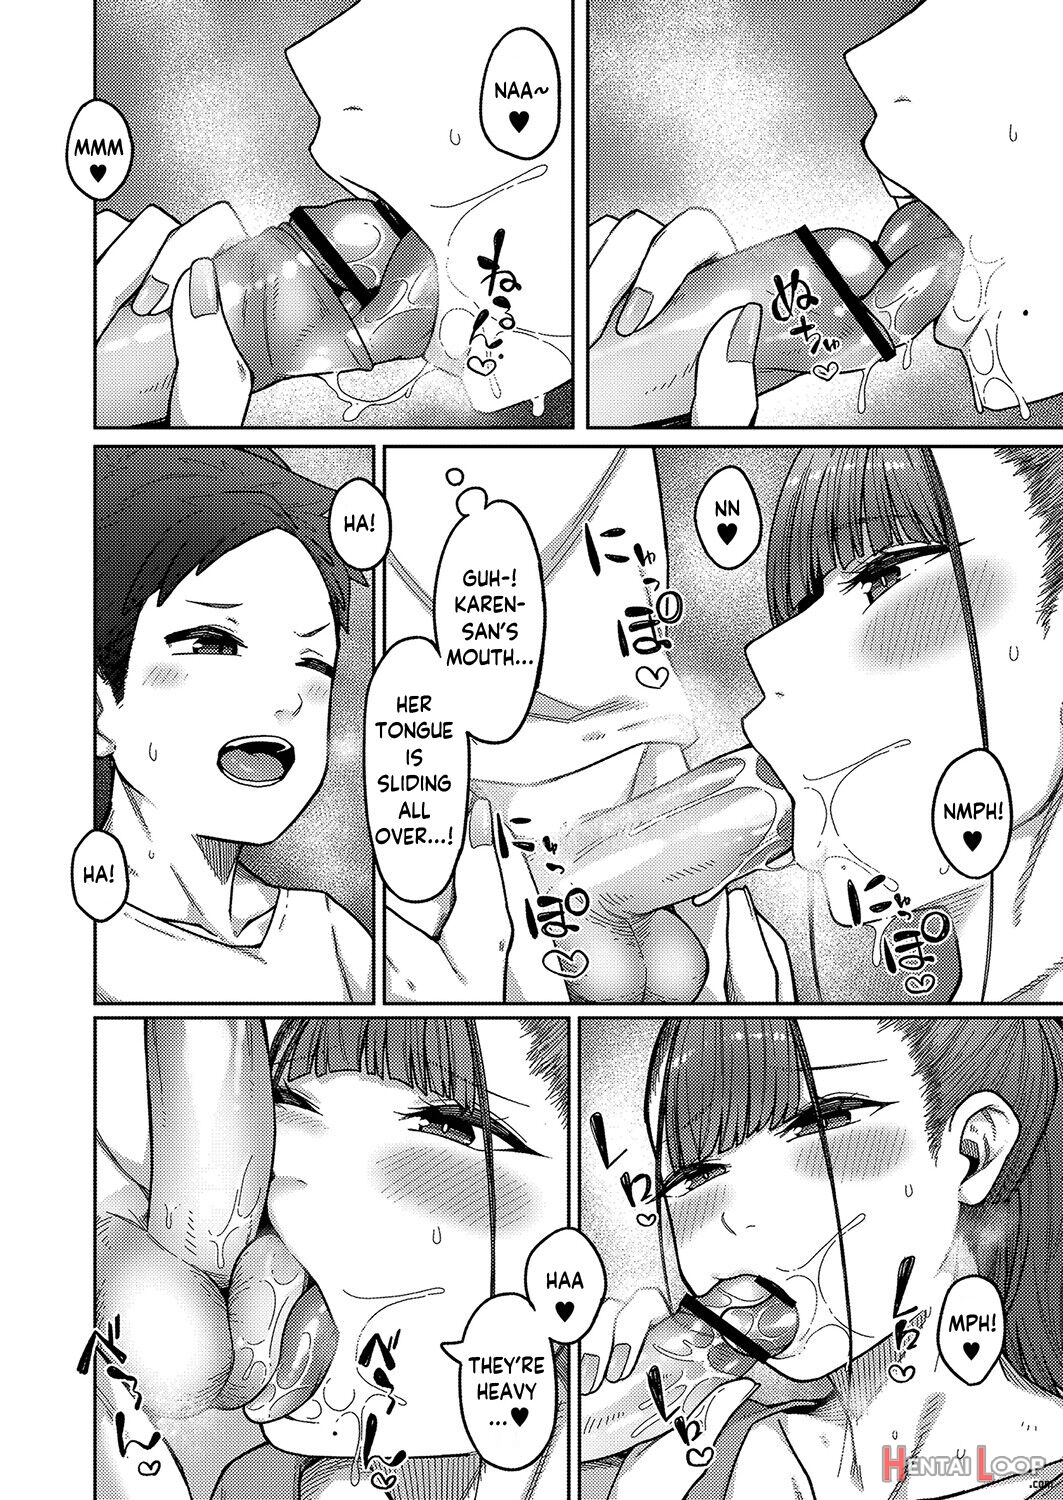 Together With Onee-san! page 6